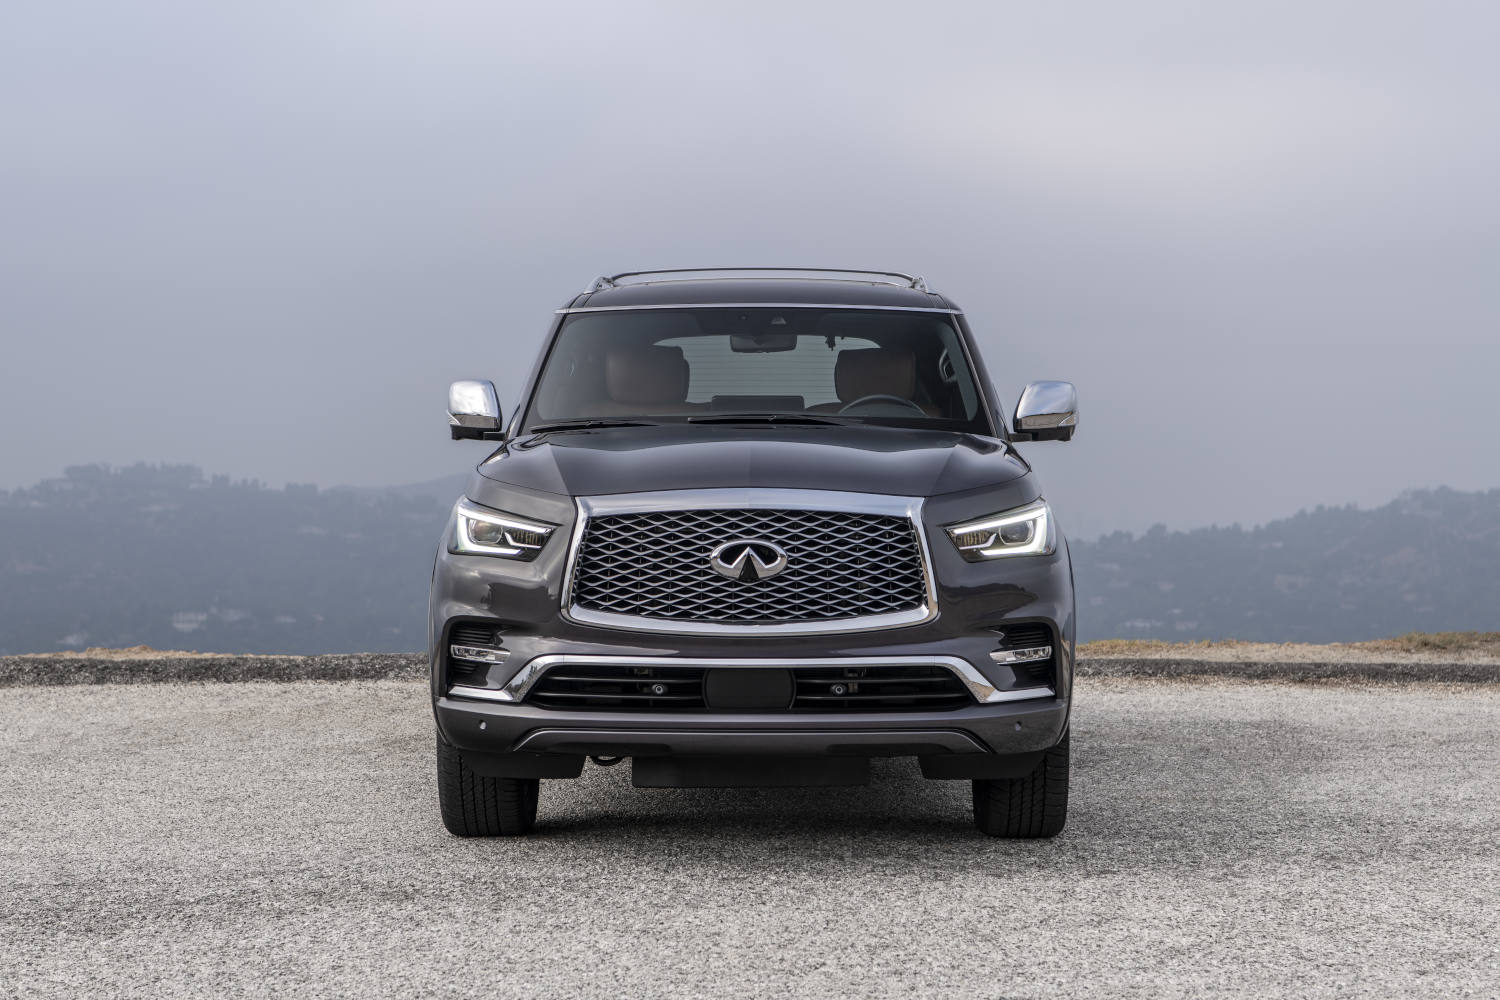 This INFINITI QX80 is a reliable SUV below MSRP